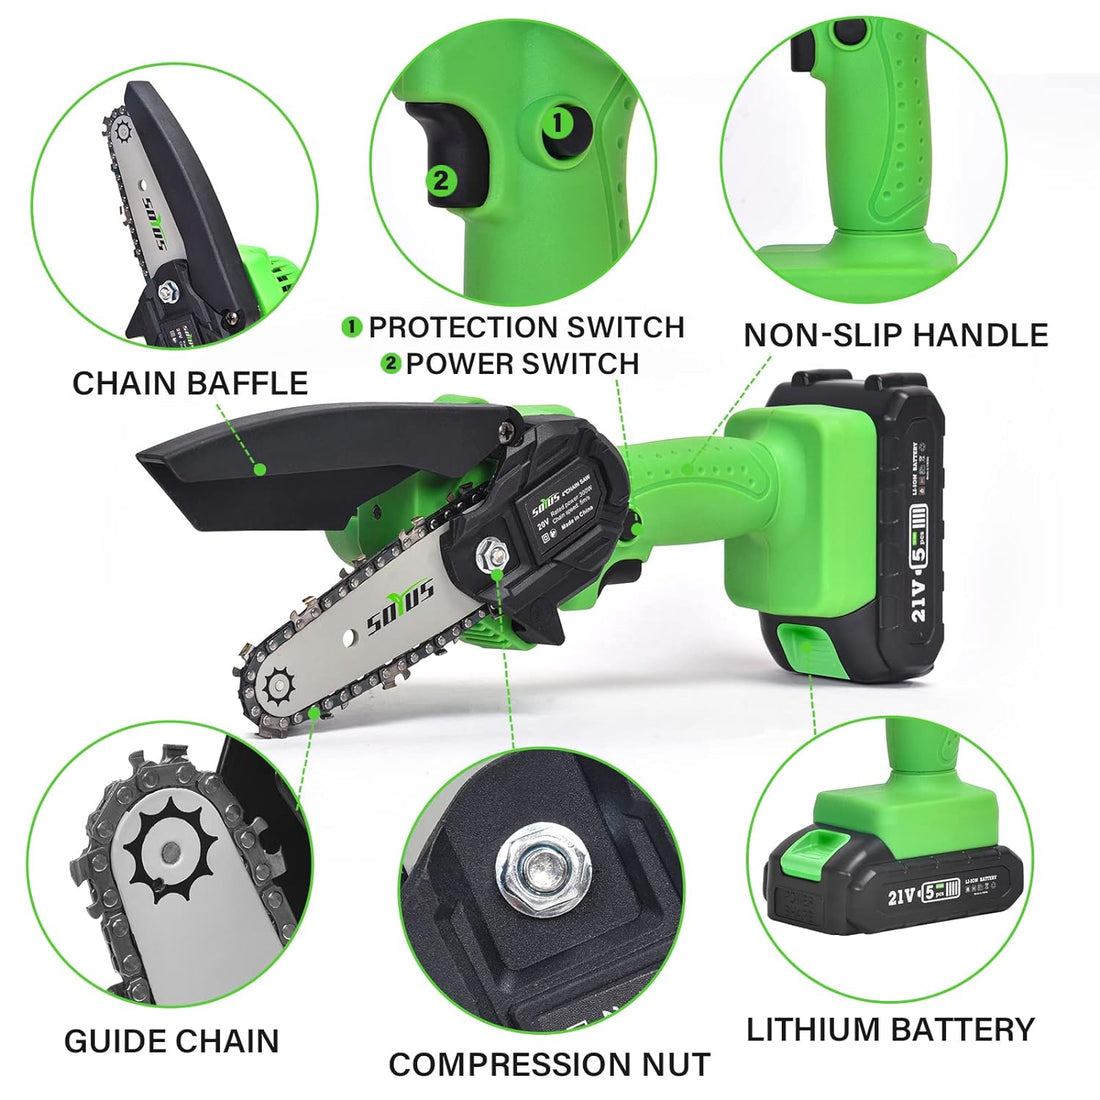 Mini Chainsaw Cordless 4 Inch Mini Chain Saw SOYUS Small Chainsaw with Safety Lock, Rechargeable Mini Lithium Chainsaw Electric Handheld Chainsaw Portable Chain Saw Tree Trimming Branch Wood Cutting